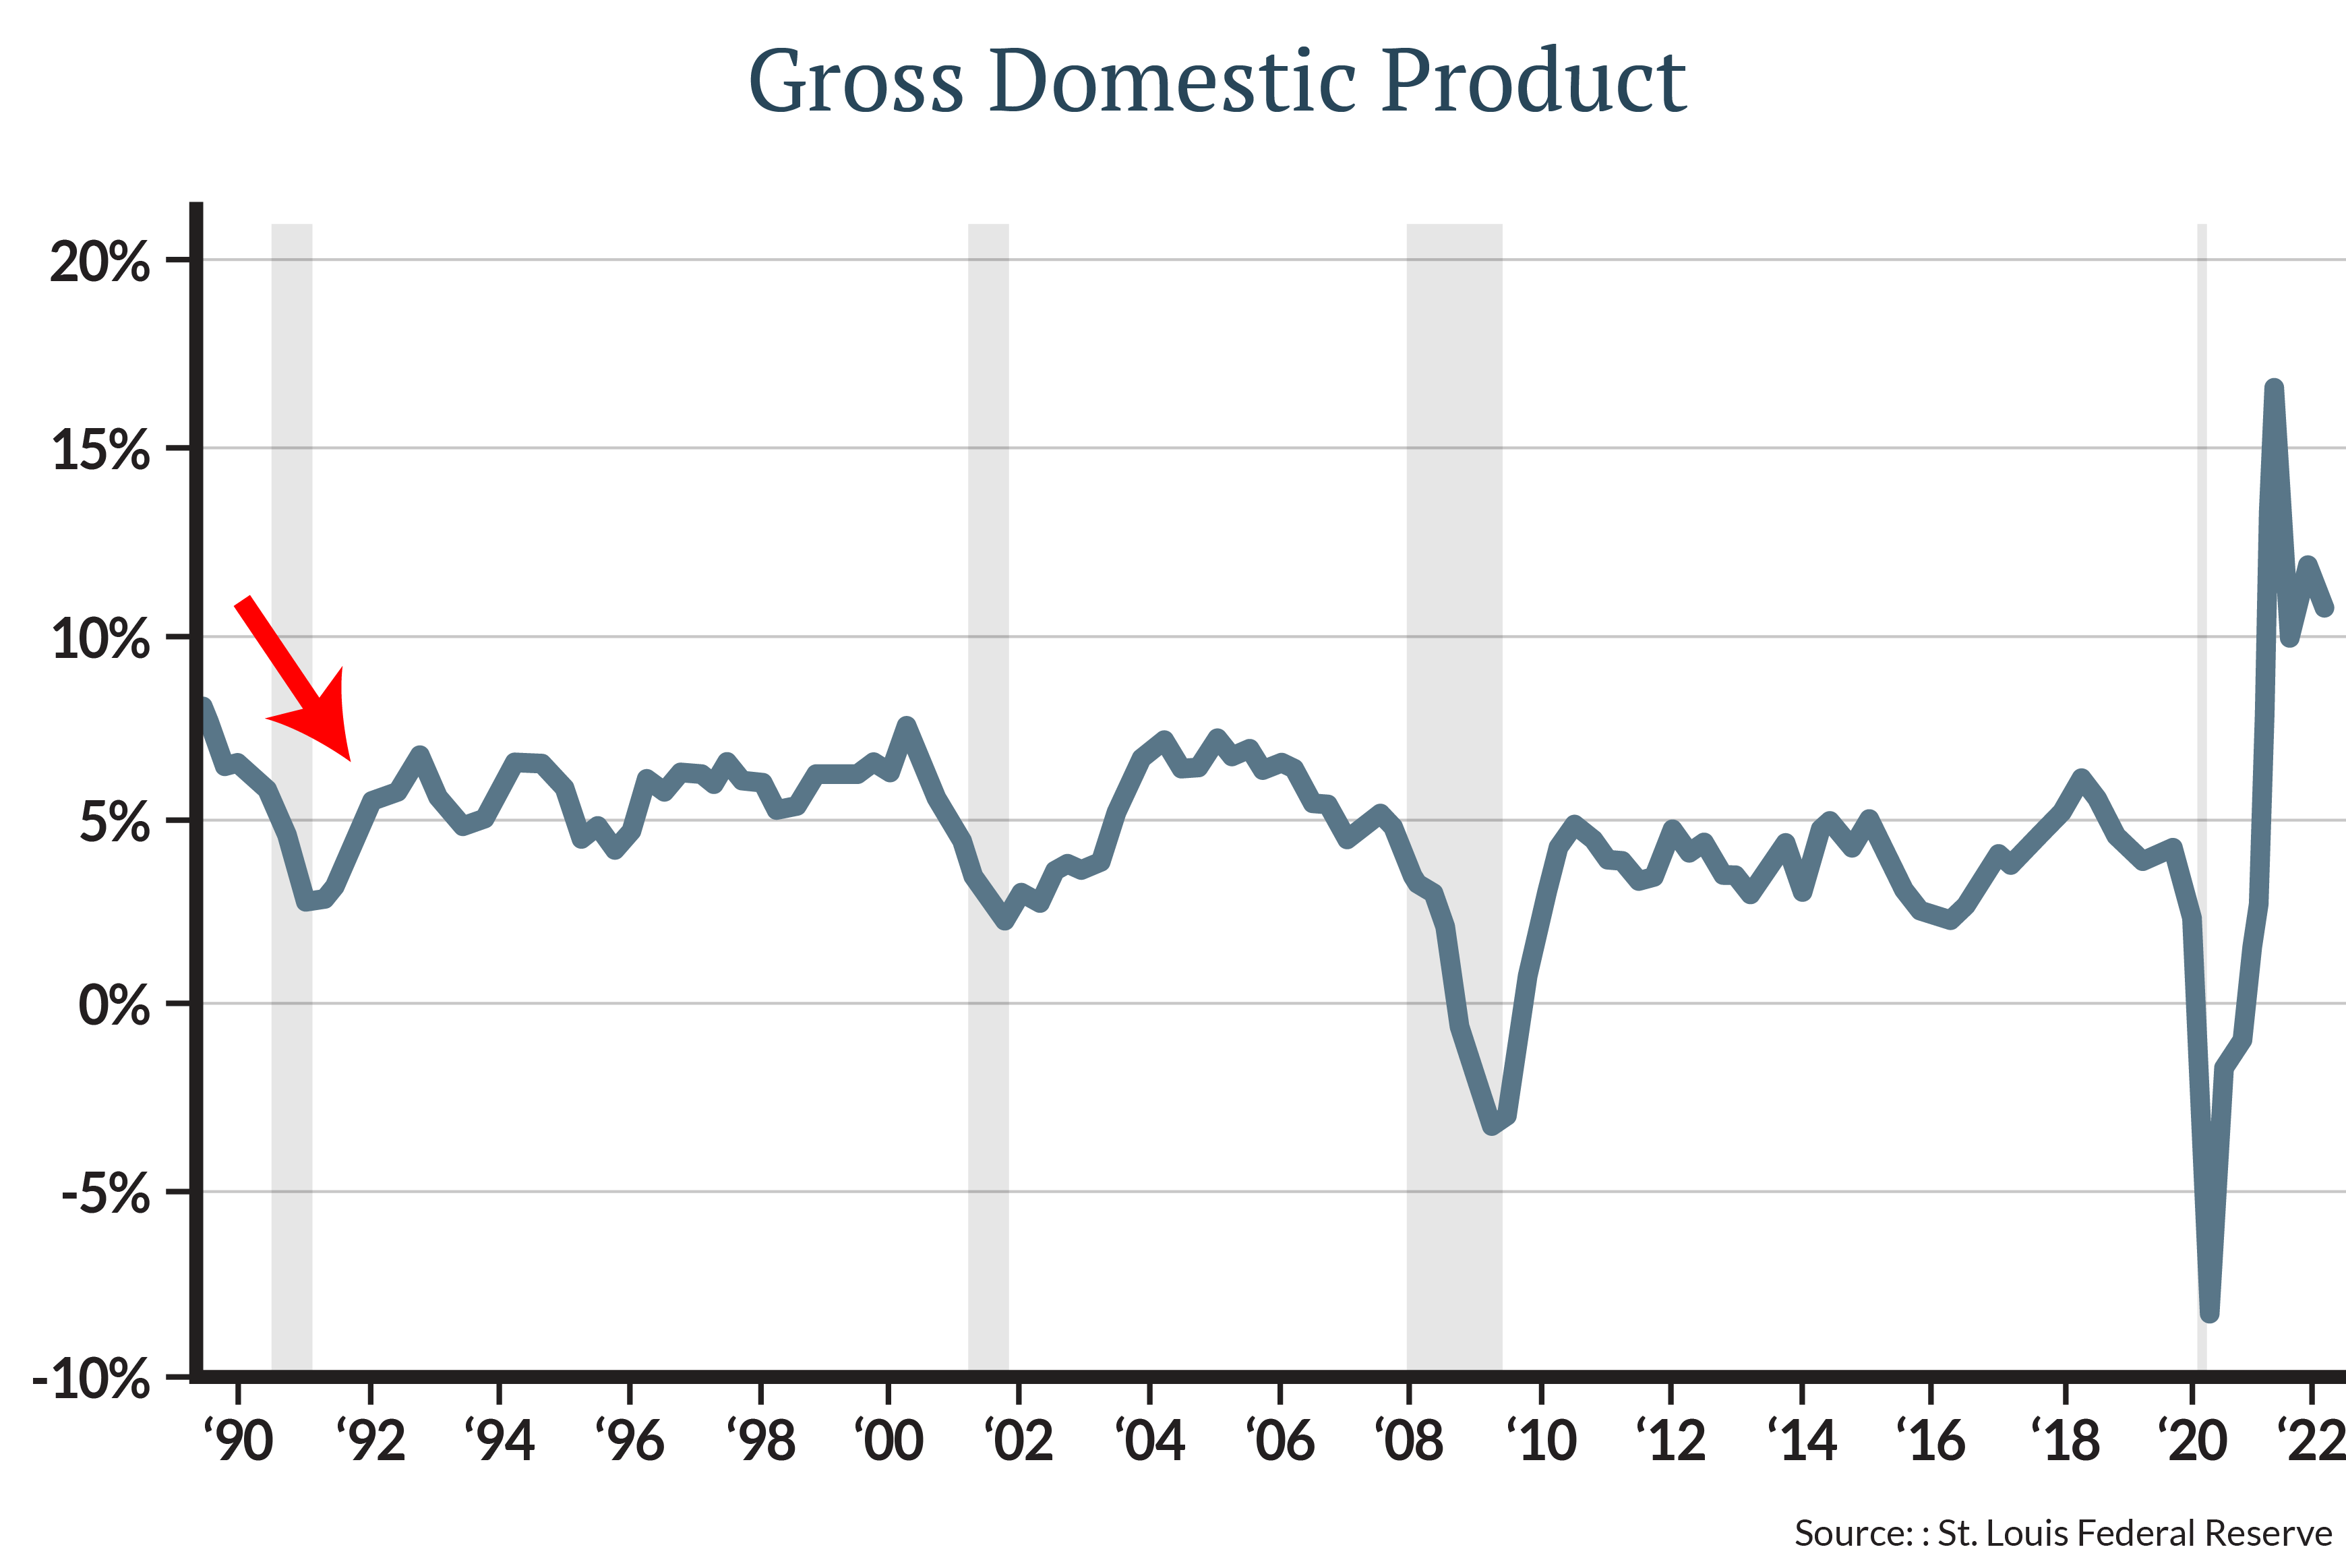 Between 1991 and 1993, growth rose from 2.8% to 6.4%. In 1993, though, inflation was only 3%. Over the next several years growth averaged more than 5%, despite the interest rate hikes—a level of growth not seen since, save for a few quarters post-pandemic.